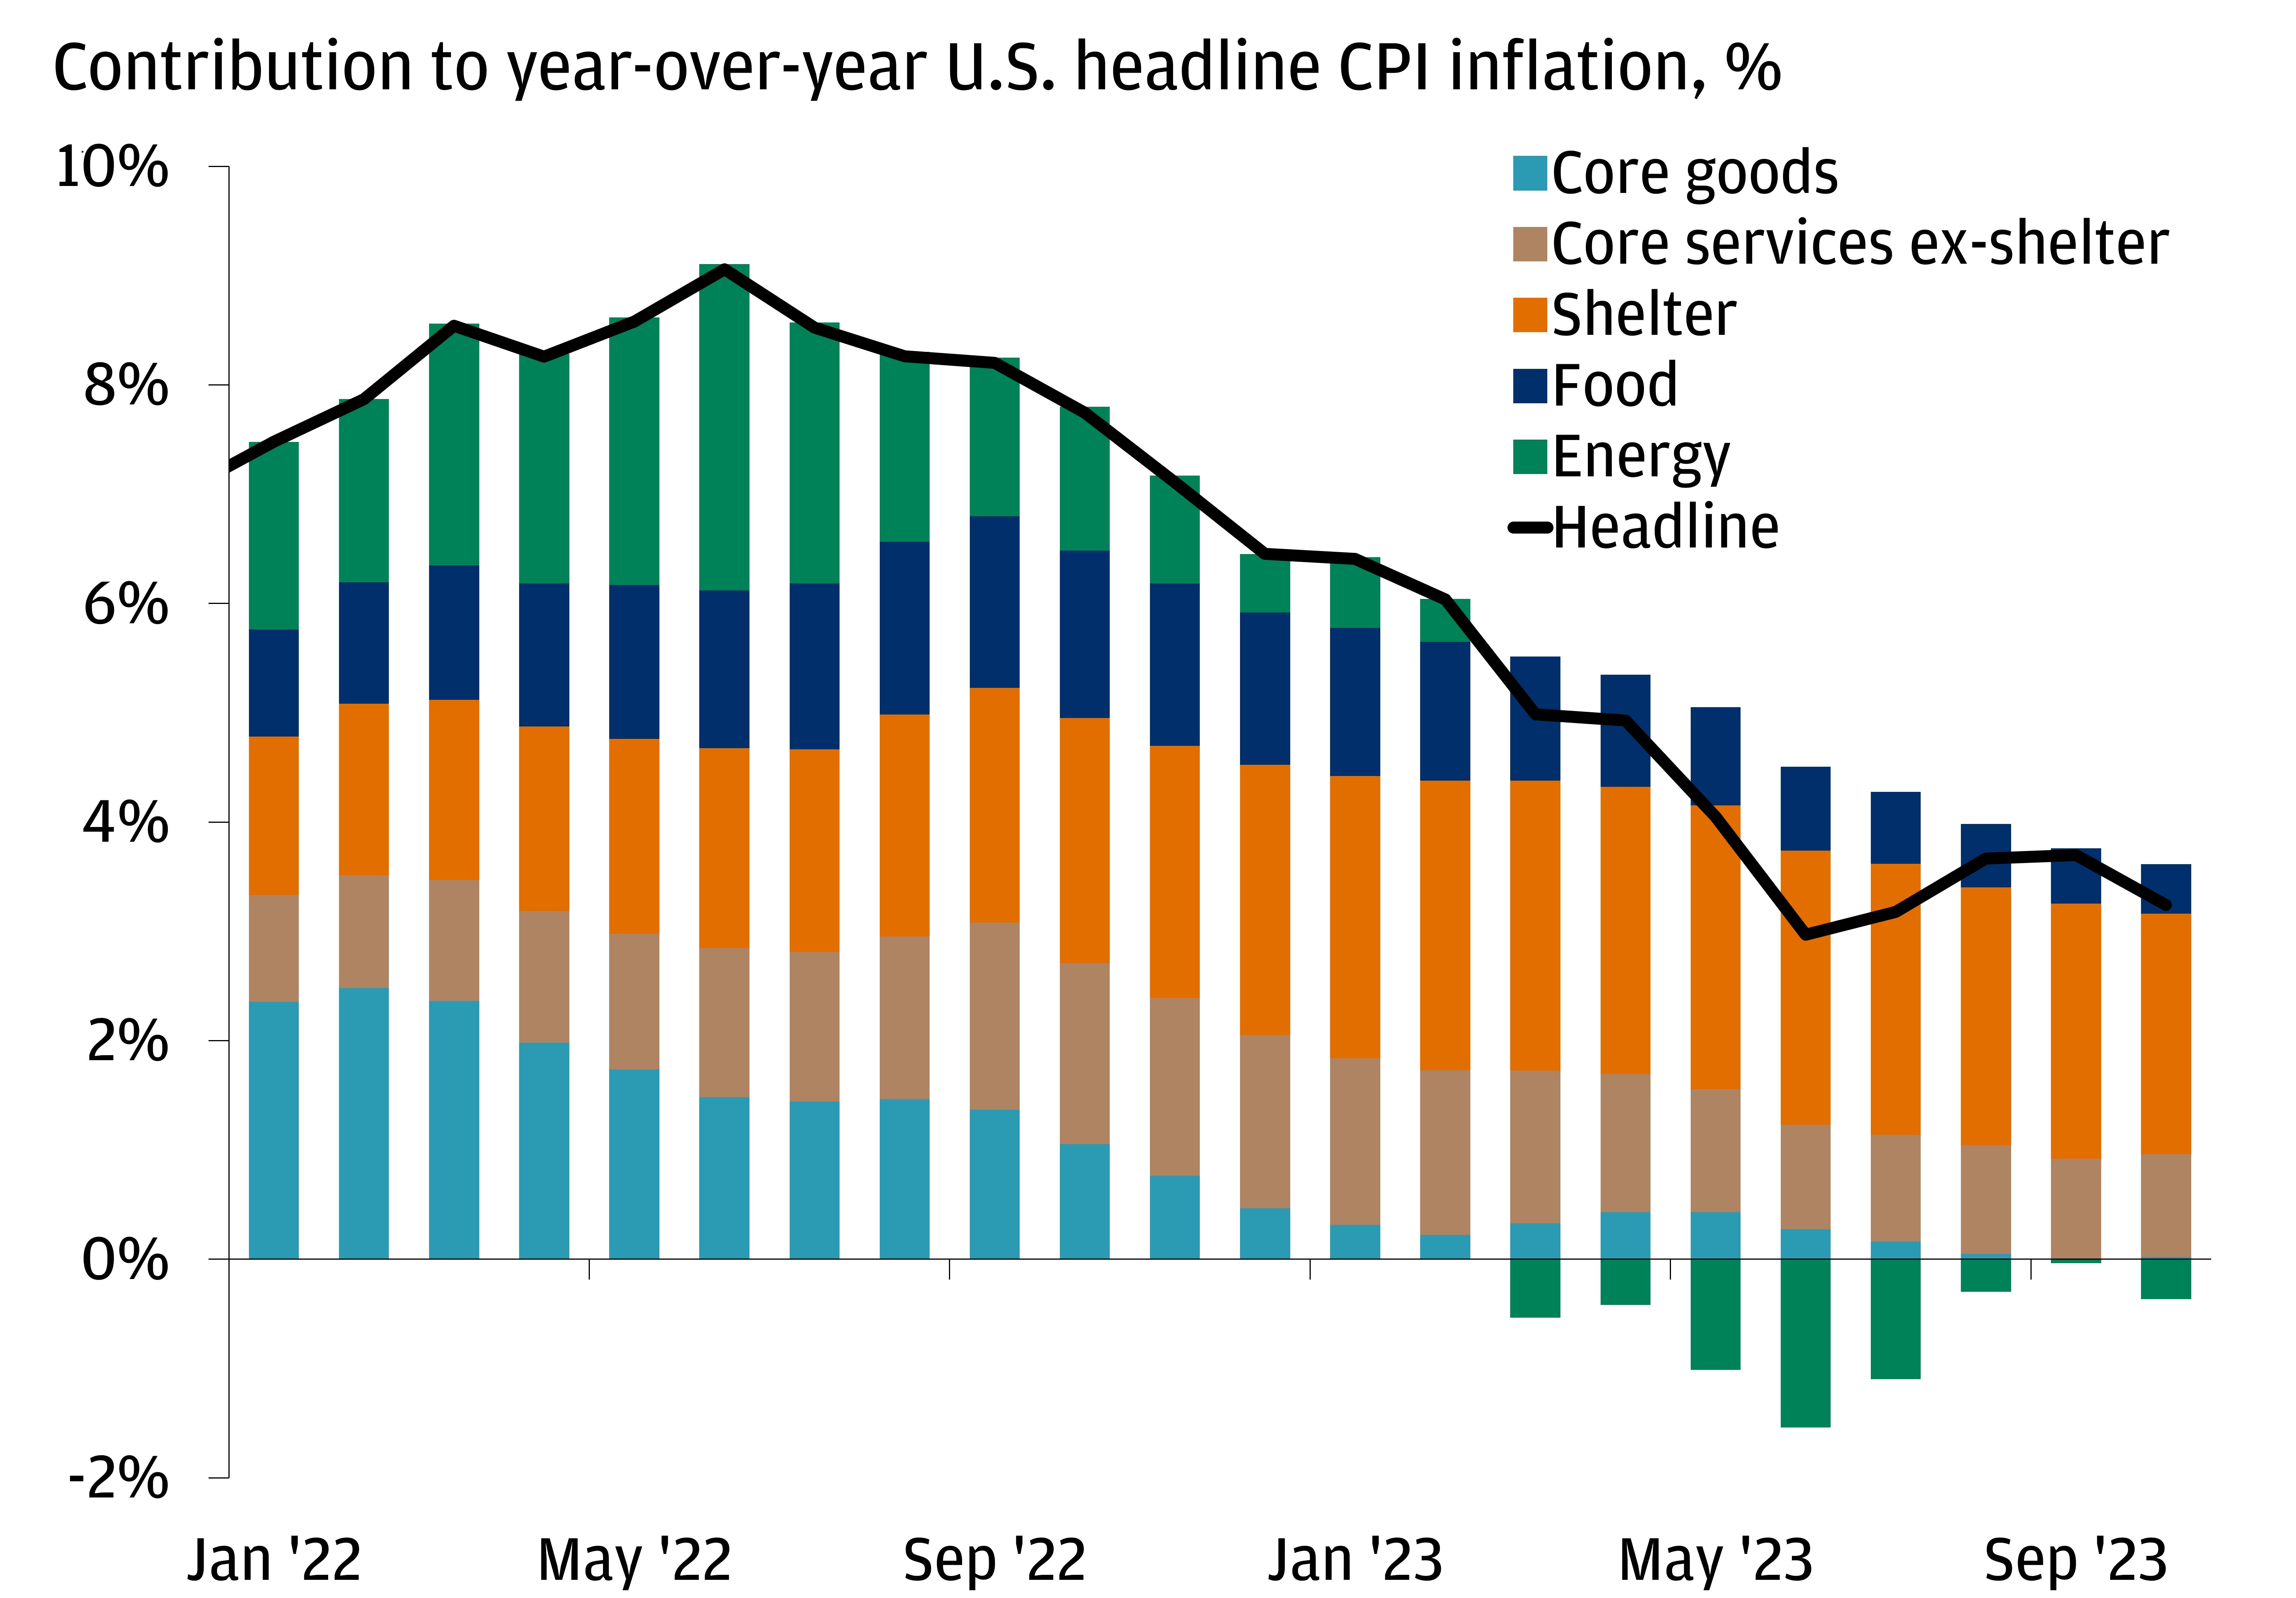 This chart shows the contribution to year-over-year U.S. headline inflation since January 2022. 